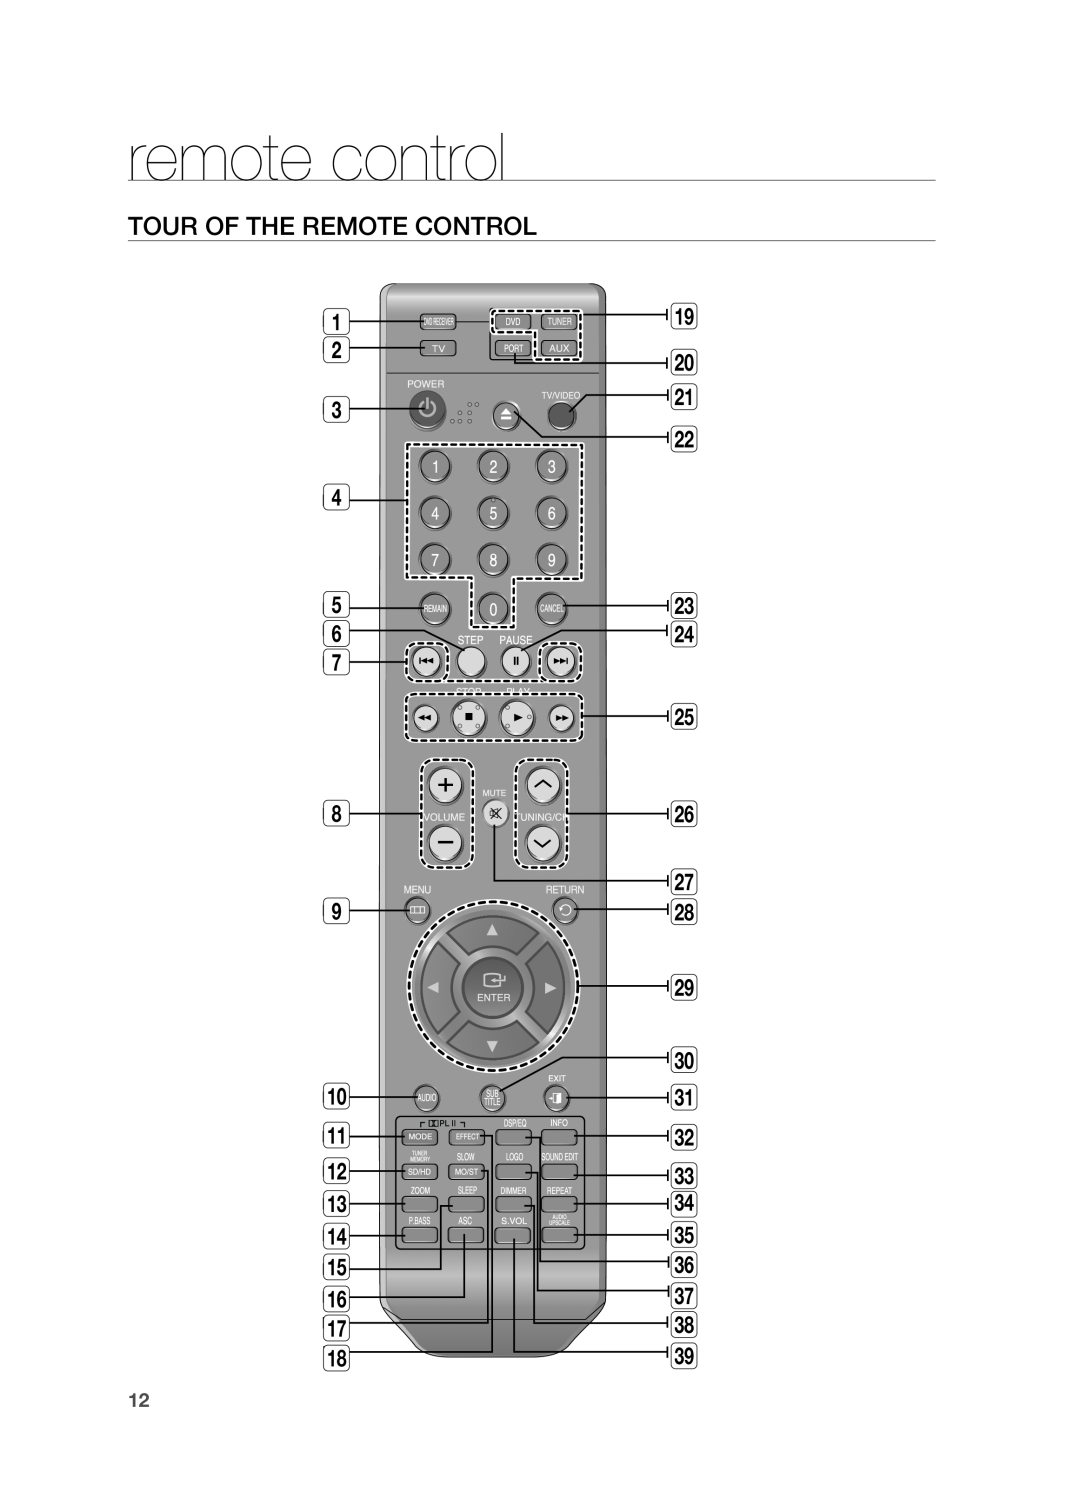 Samsung HT-TX715 user manual remote control, Tour of the Remote Control, 29 30 31 32 33 34 35 36 37 